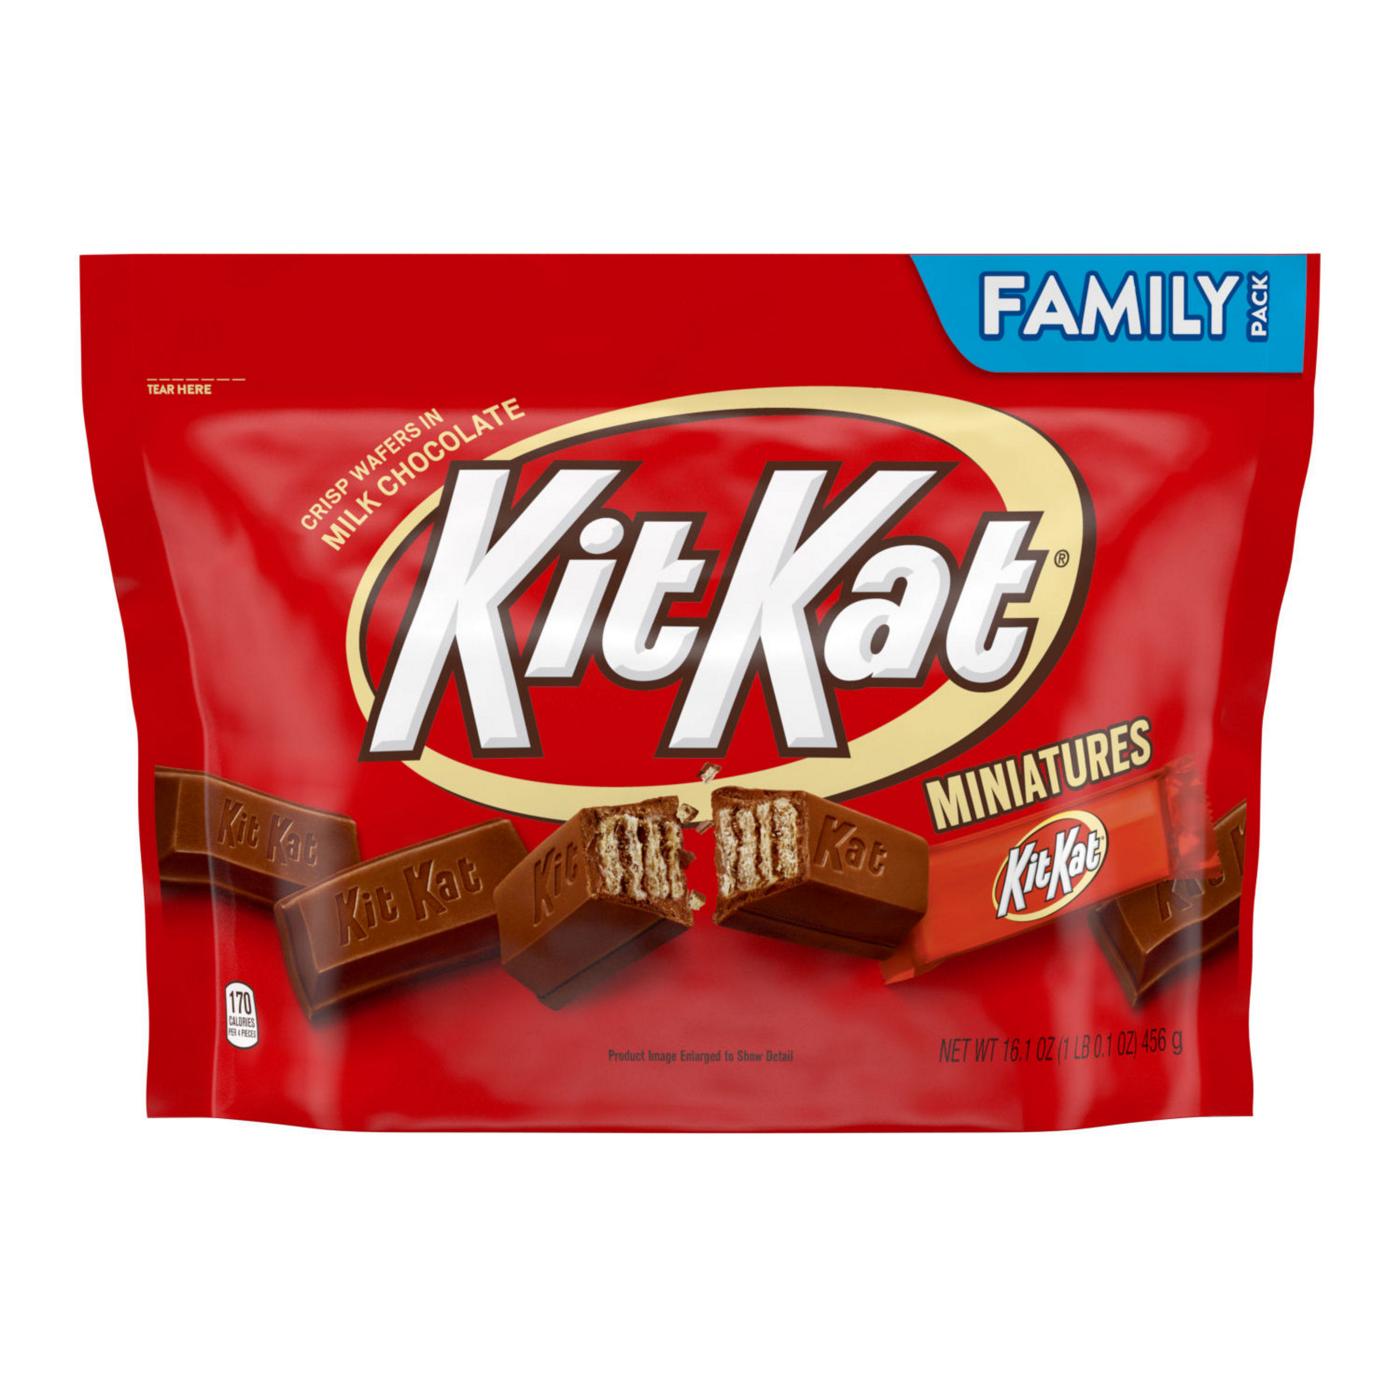 Kit Kat Miniatures Milk Chocolate Candy Bars Family Pack; image 1 of 6